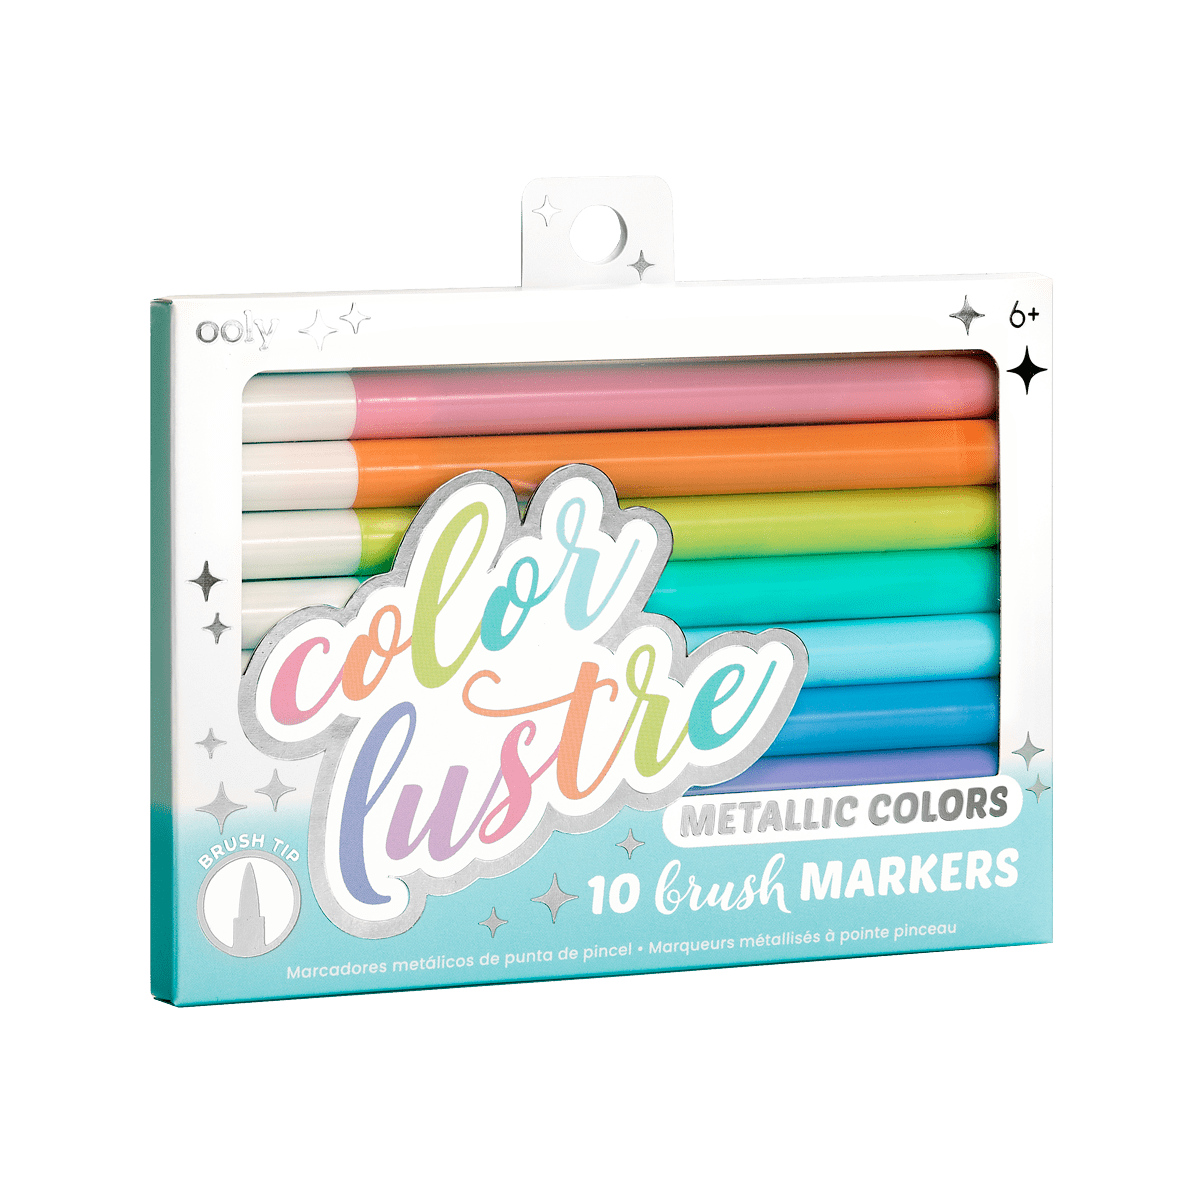 OOLY Color Lustre Metallic Brush Markers - Set of 10 by OOLY